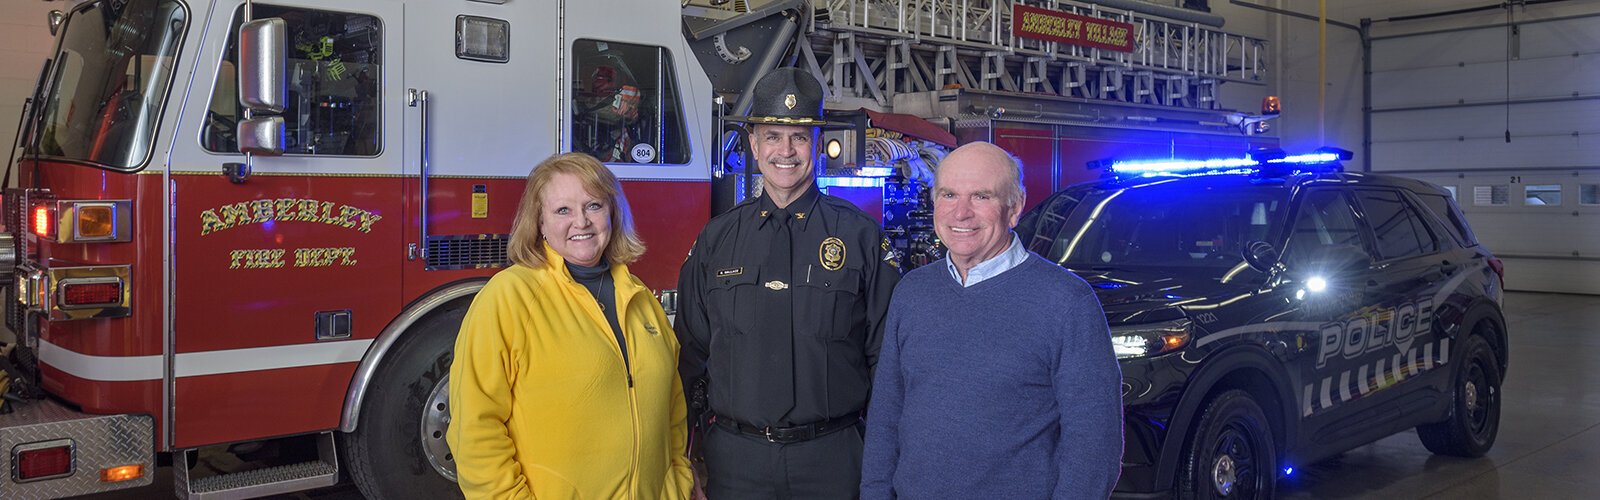 l. to r. Tammy Reasoner, Clerk of Council & Executive Asst. to the Village Manager; Richard L. Wallace, Amberley Village Police-Fire Chief; Thomas C. Muething, Mayor of Amberley Village